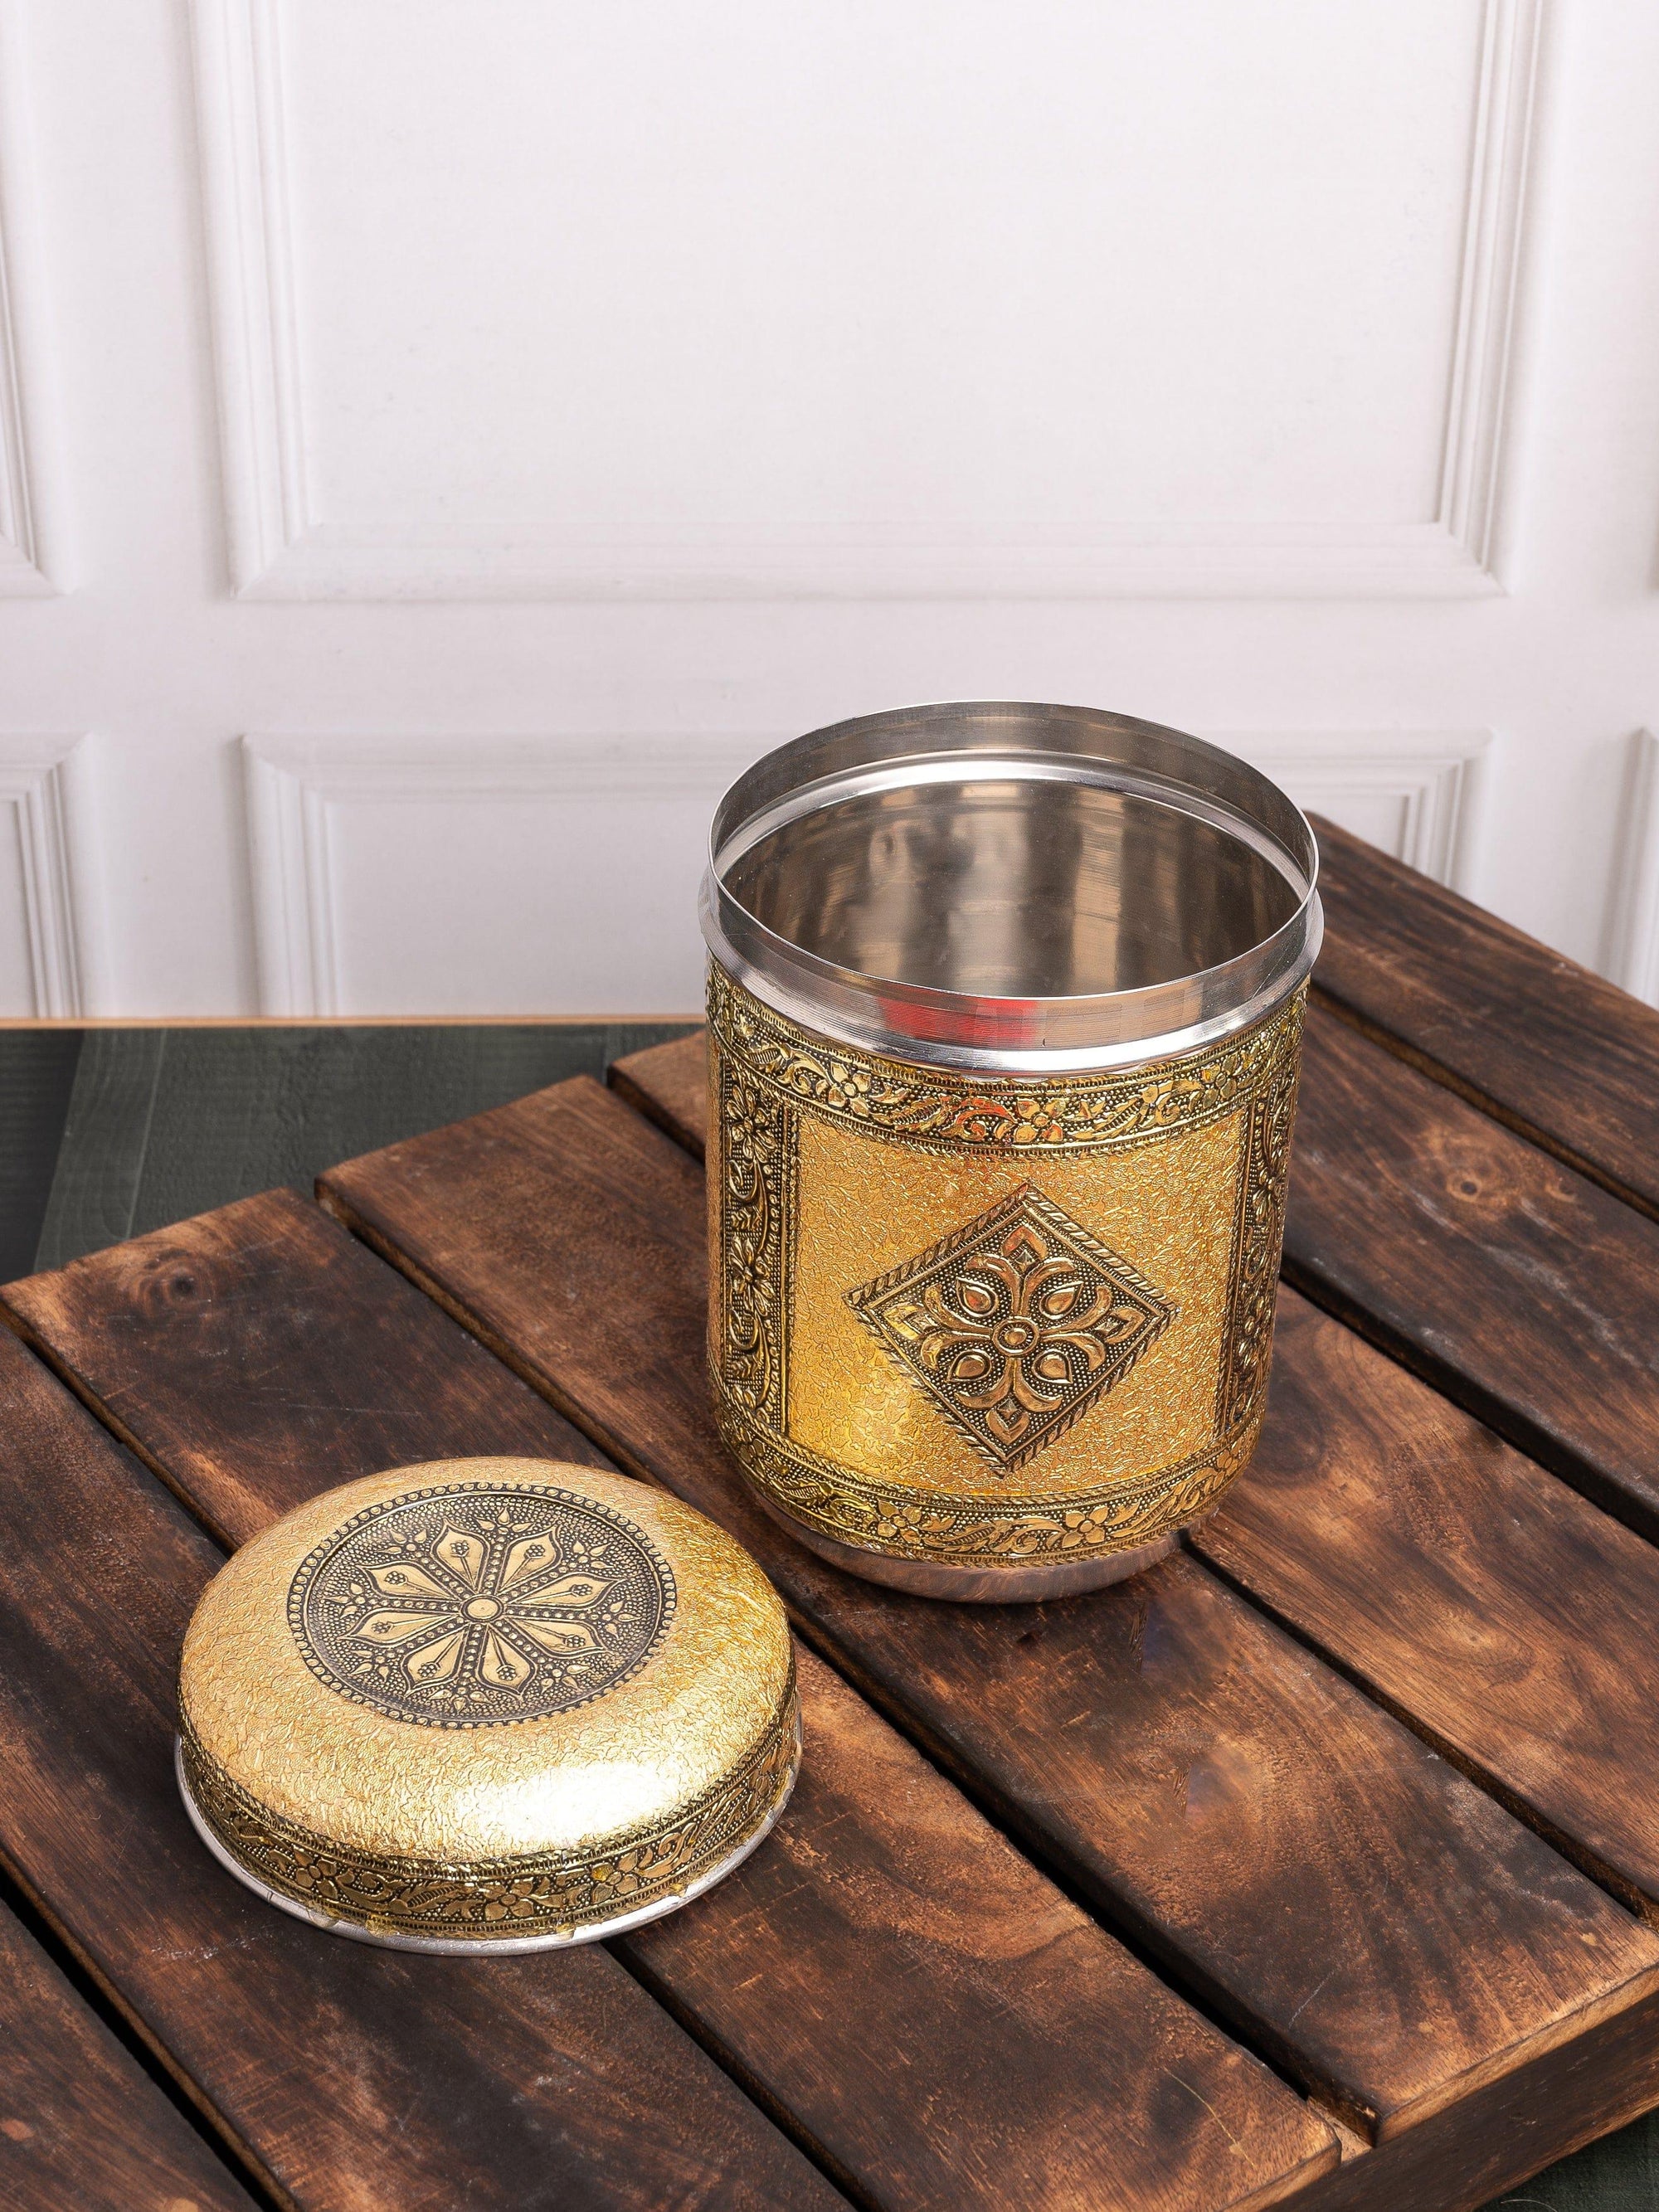 Stainless Steel Multipurpose Kitchen Canister with Meenakari work Laminated on the Exteriors - The Heritage Artifacts